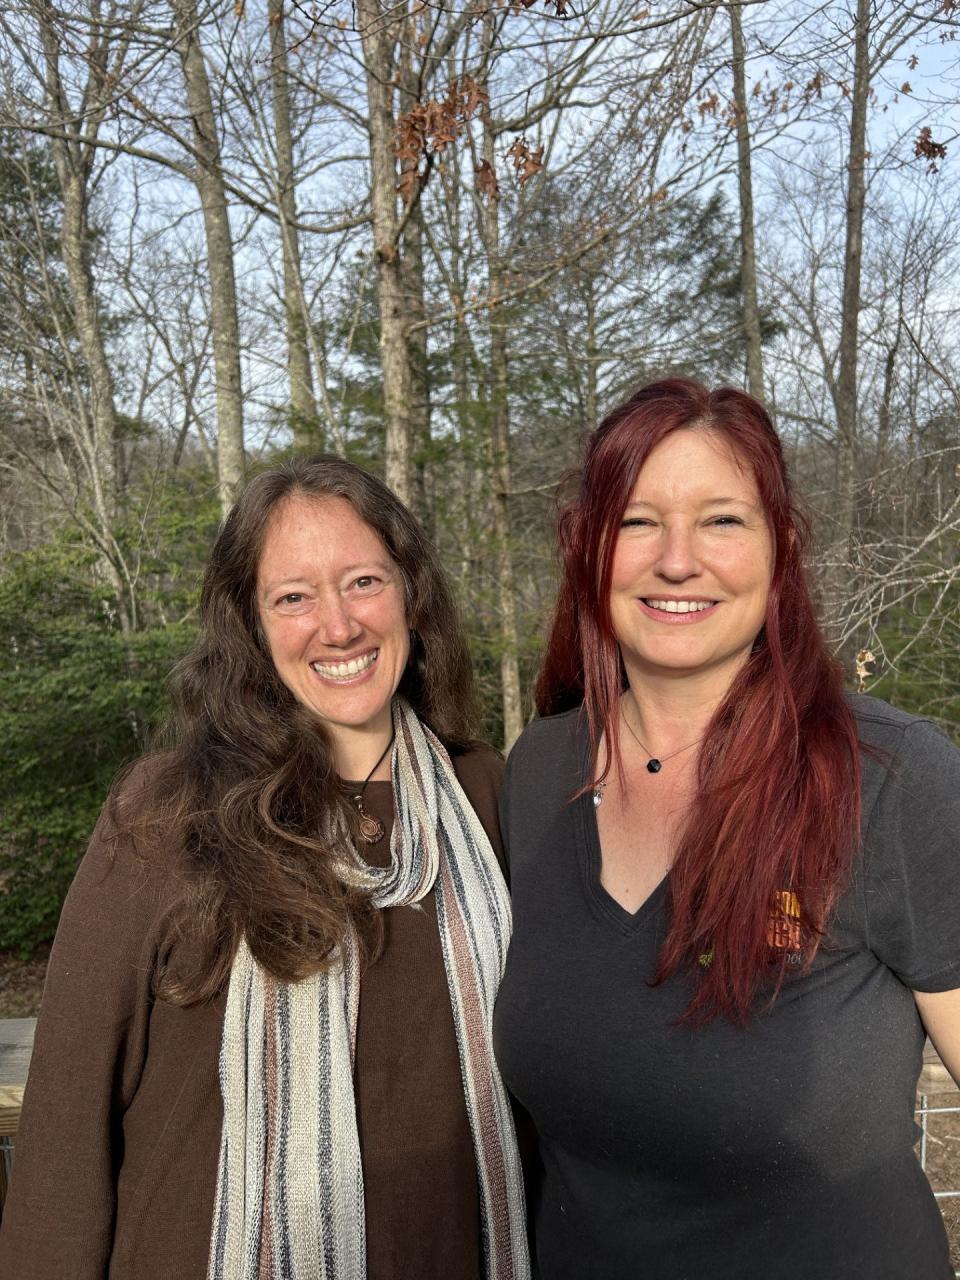 Pictured at left is Dana Brown, Woodson Branch Nature School programs director, and Debbie DeLisle, the school's executive director.